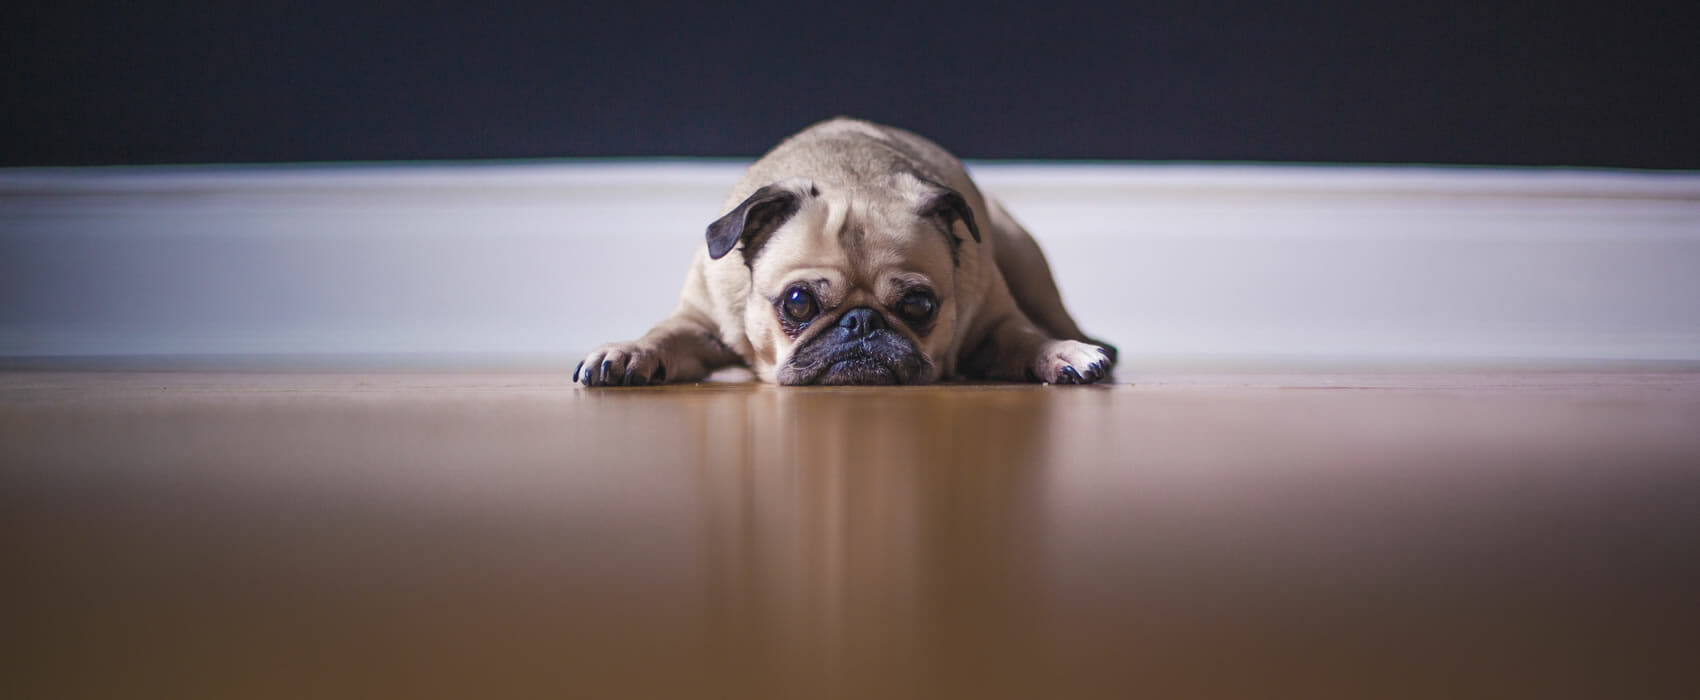 This dog shows a lack of motivation! Unsplash.com photo by Matthew Wiebe